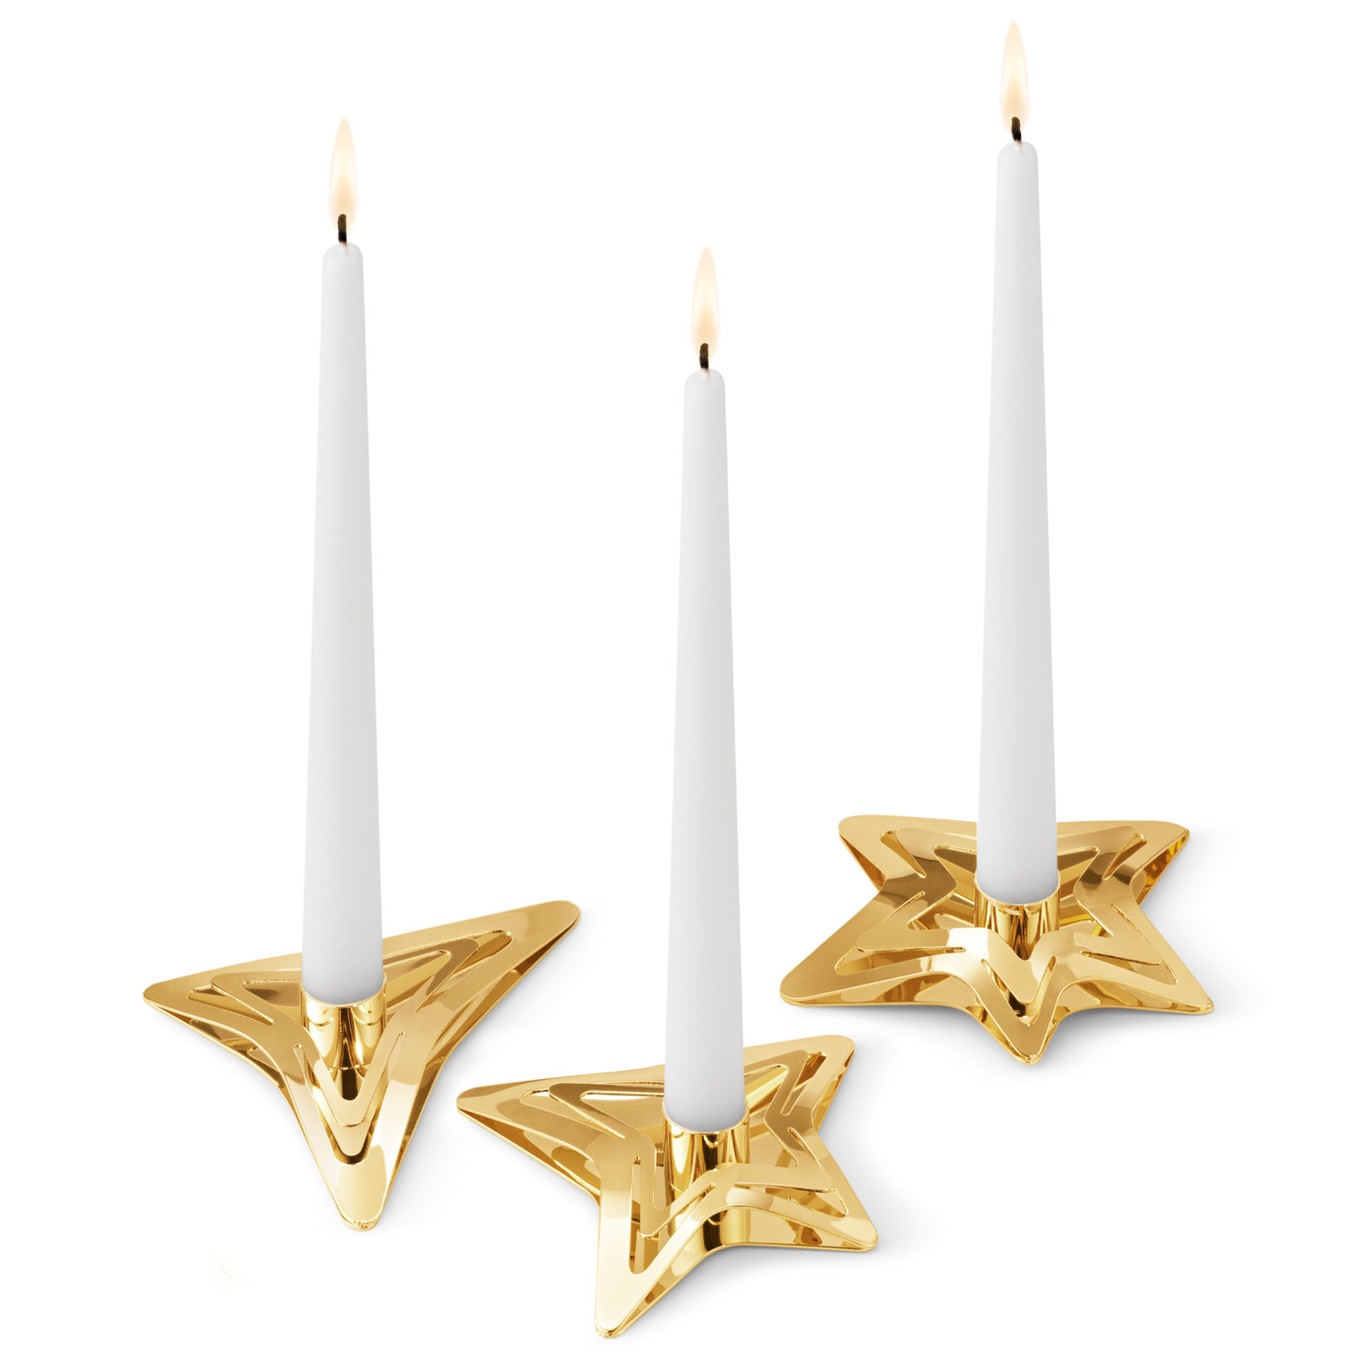 Star Xmas Candlesticks 3 Pieces, Gold-Plated Stainless Steel